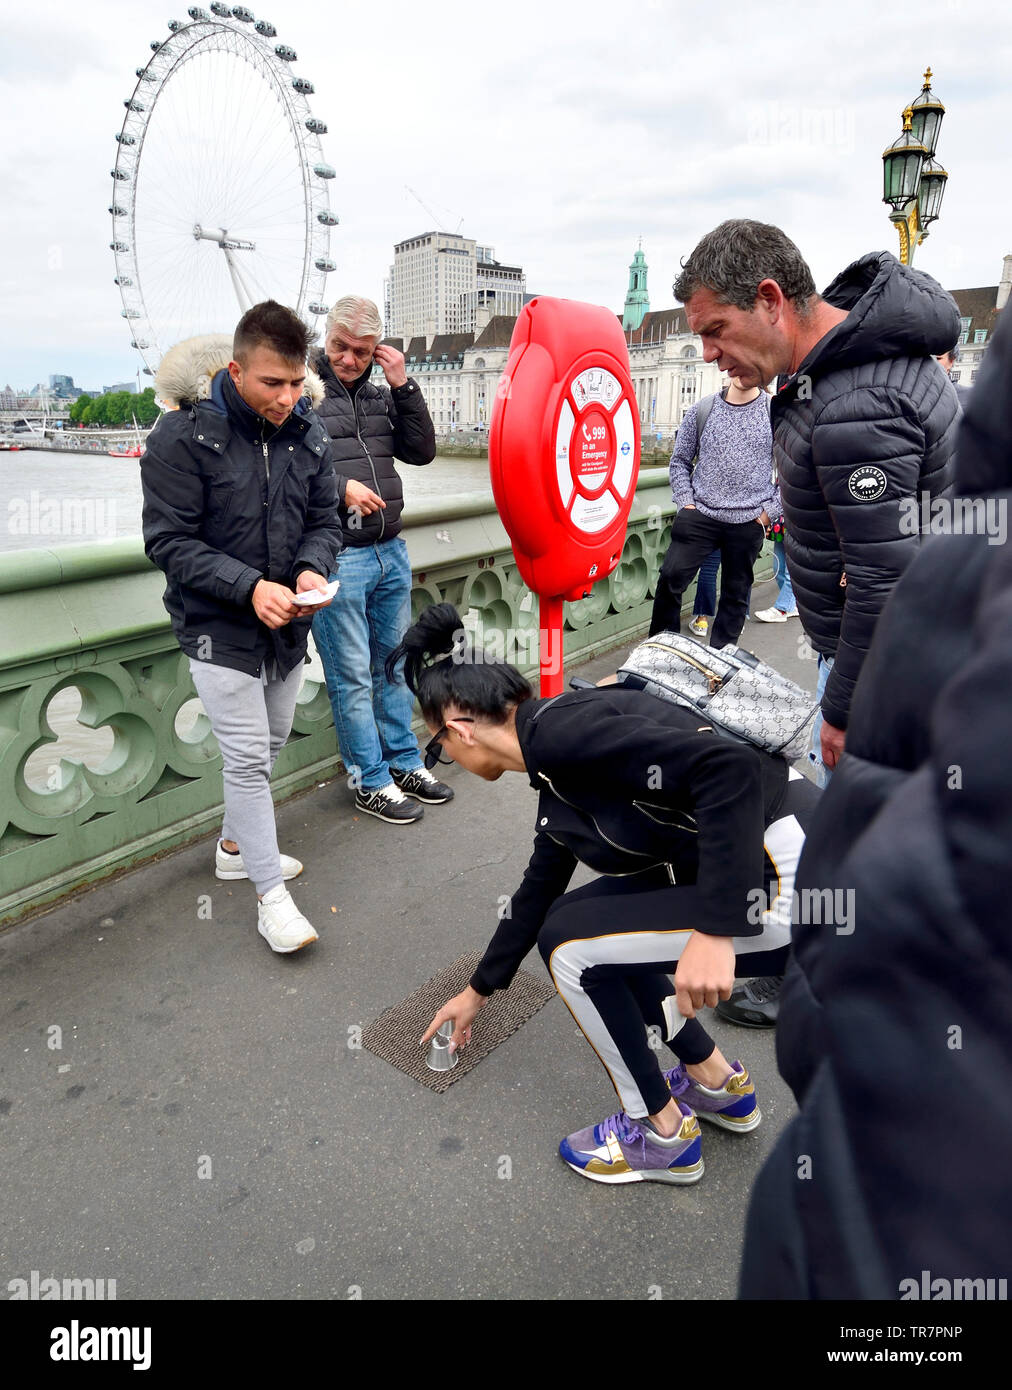 London, England, UK. Illegal Cup and Ball / 3 Cups Trick on Westminster Bridge, trying to con money from passing tourists Stock Photo